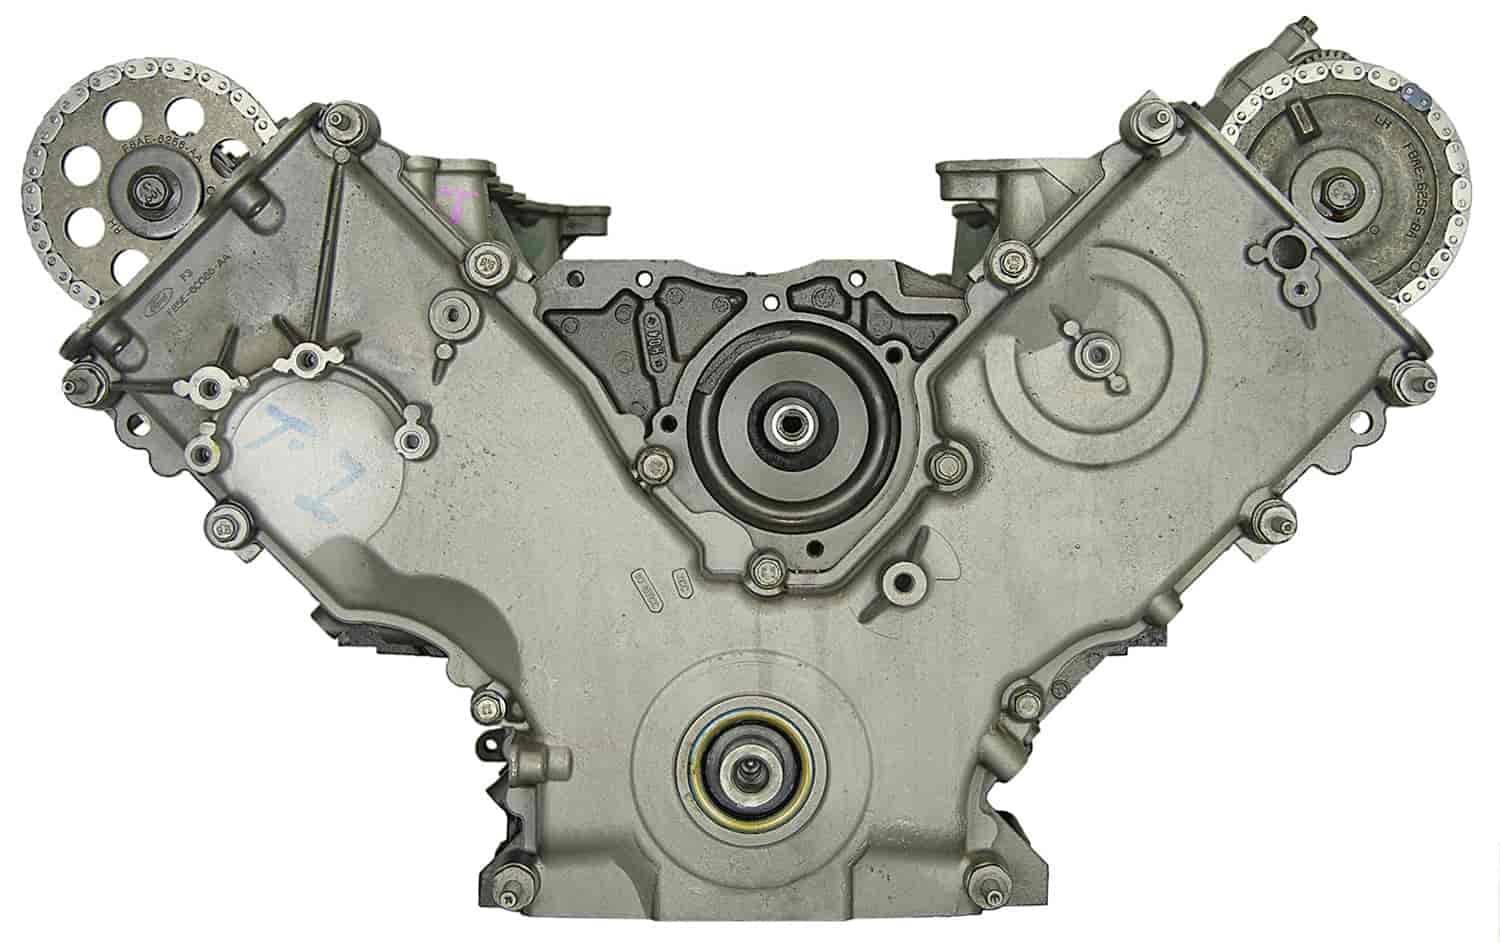 Remanufactured Crate Engine for 1999 Ford F-Series Truck with 6.8L V10